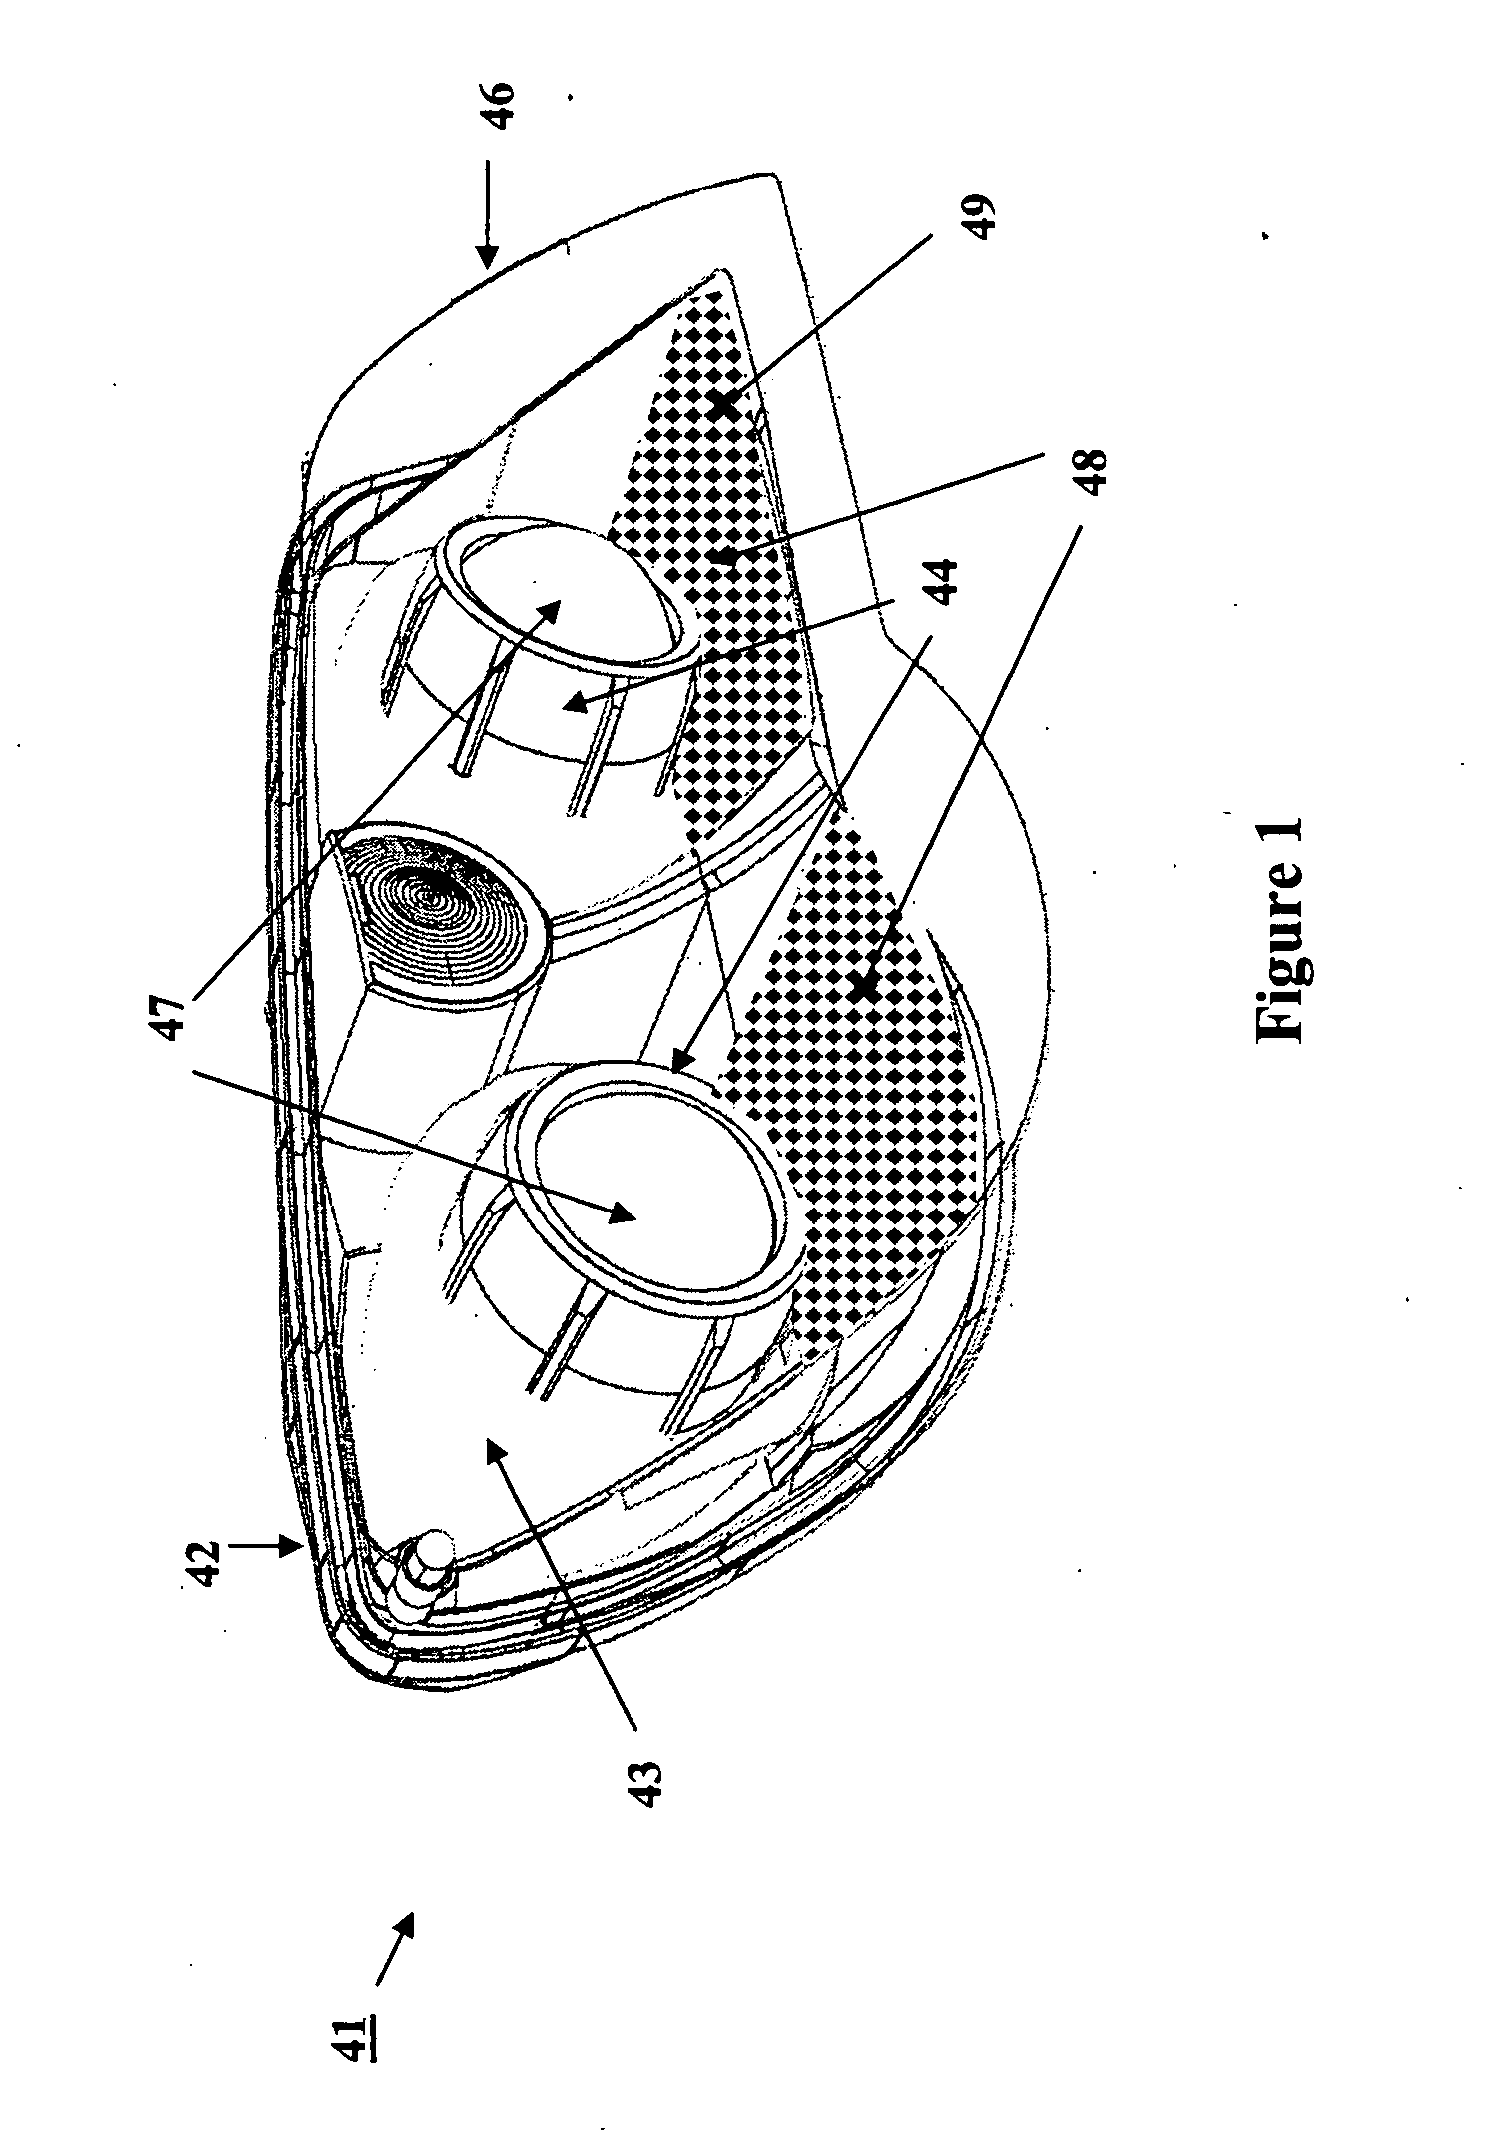 Method of forming a decorative motif on a component of lighting or indicating apparatus for a motor vehicle